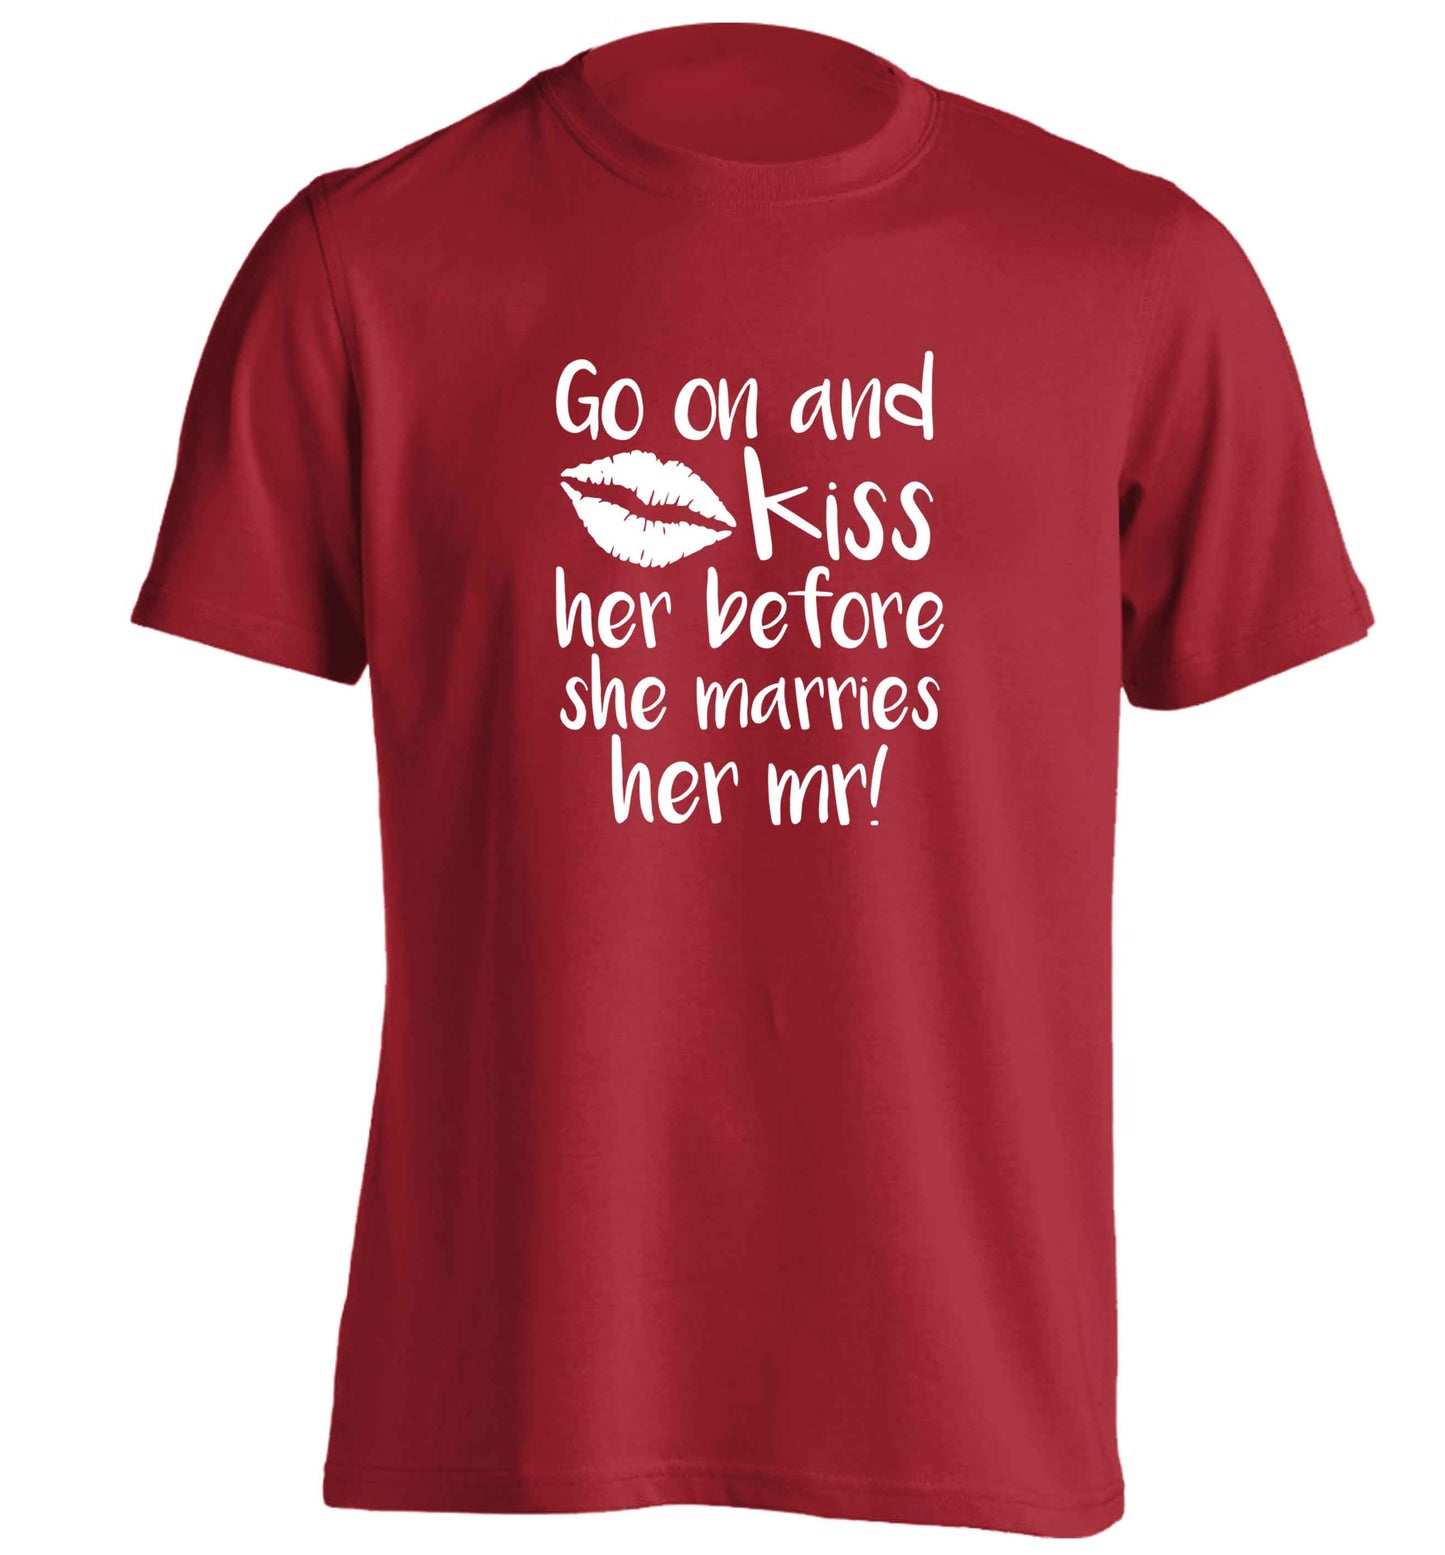 Kiss her before she marries her mr! adults unisex red Tshirt 2XL